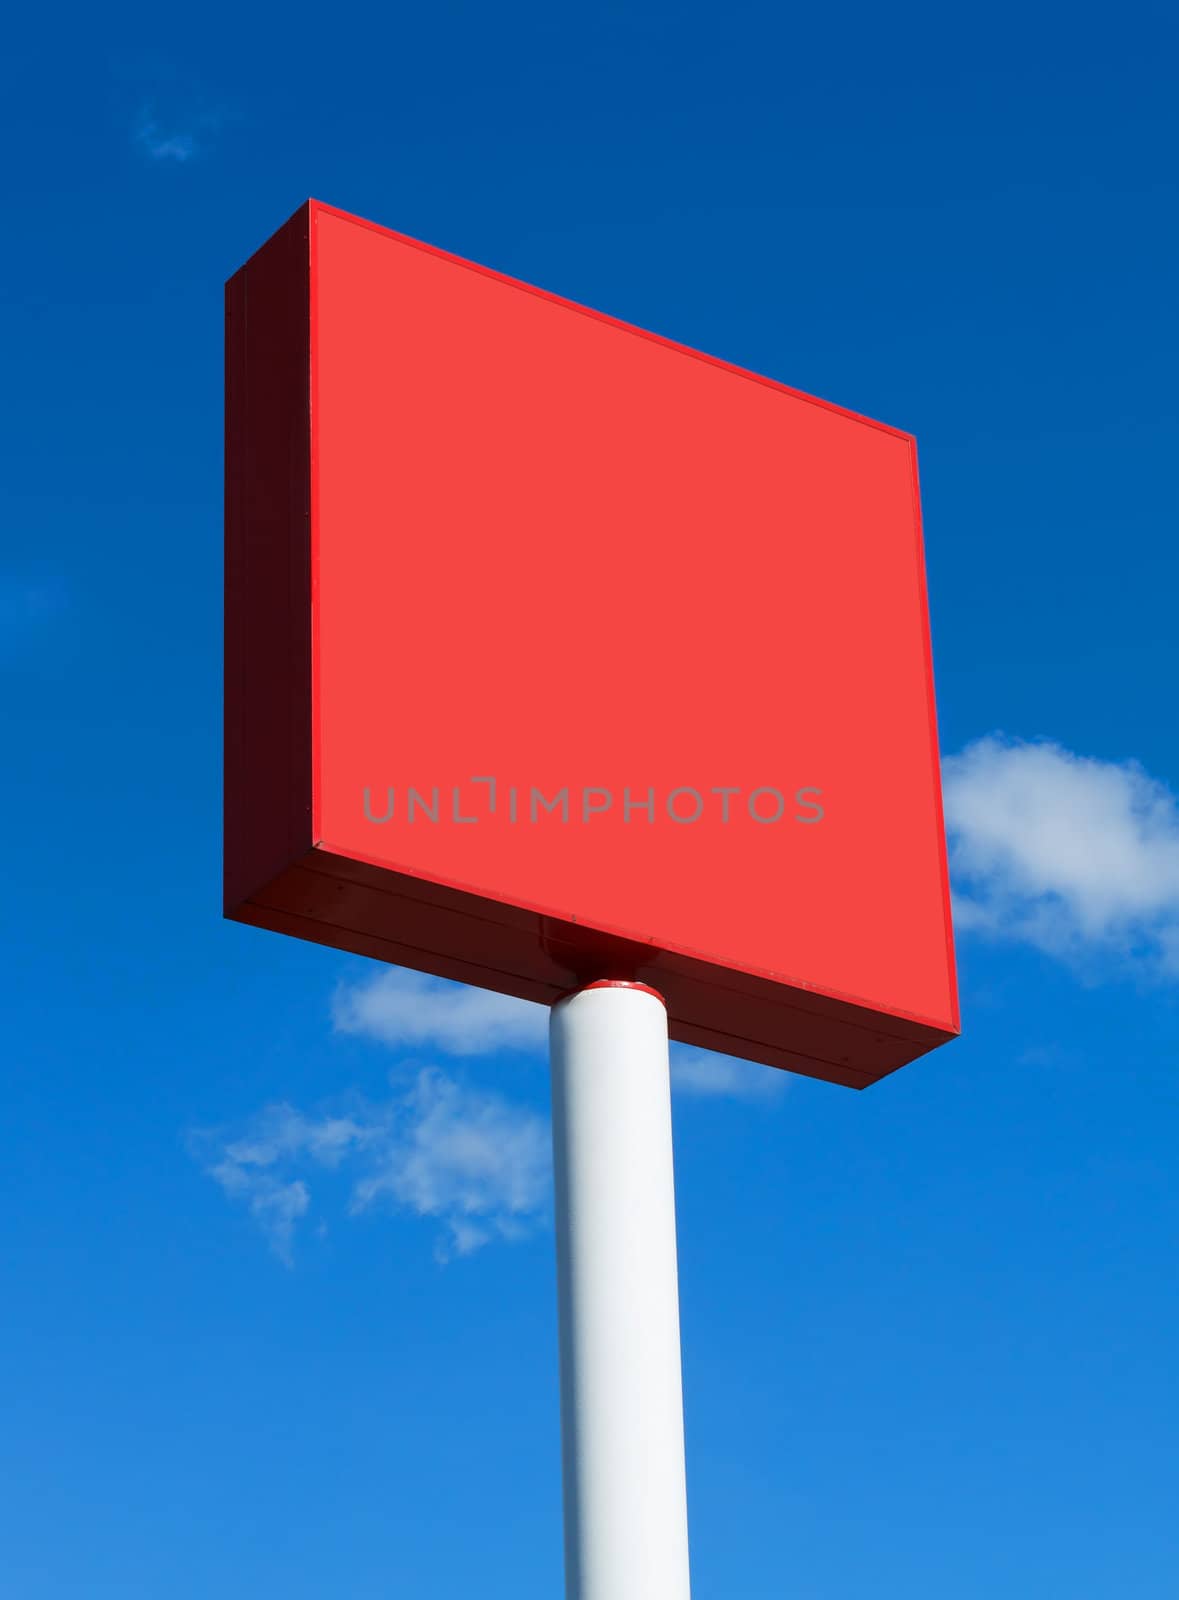 Red blank billboard on a sunny day with blue sky